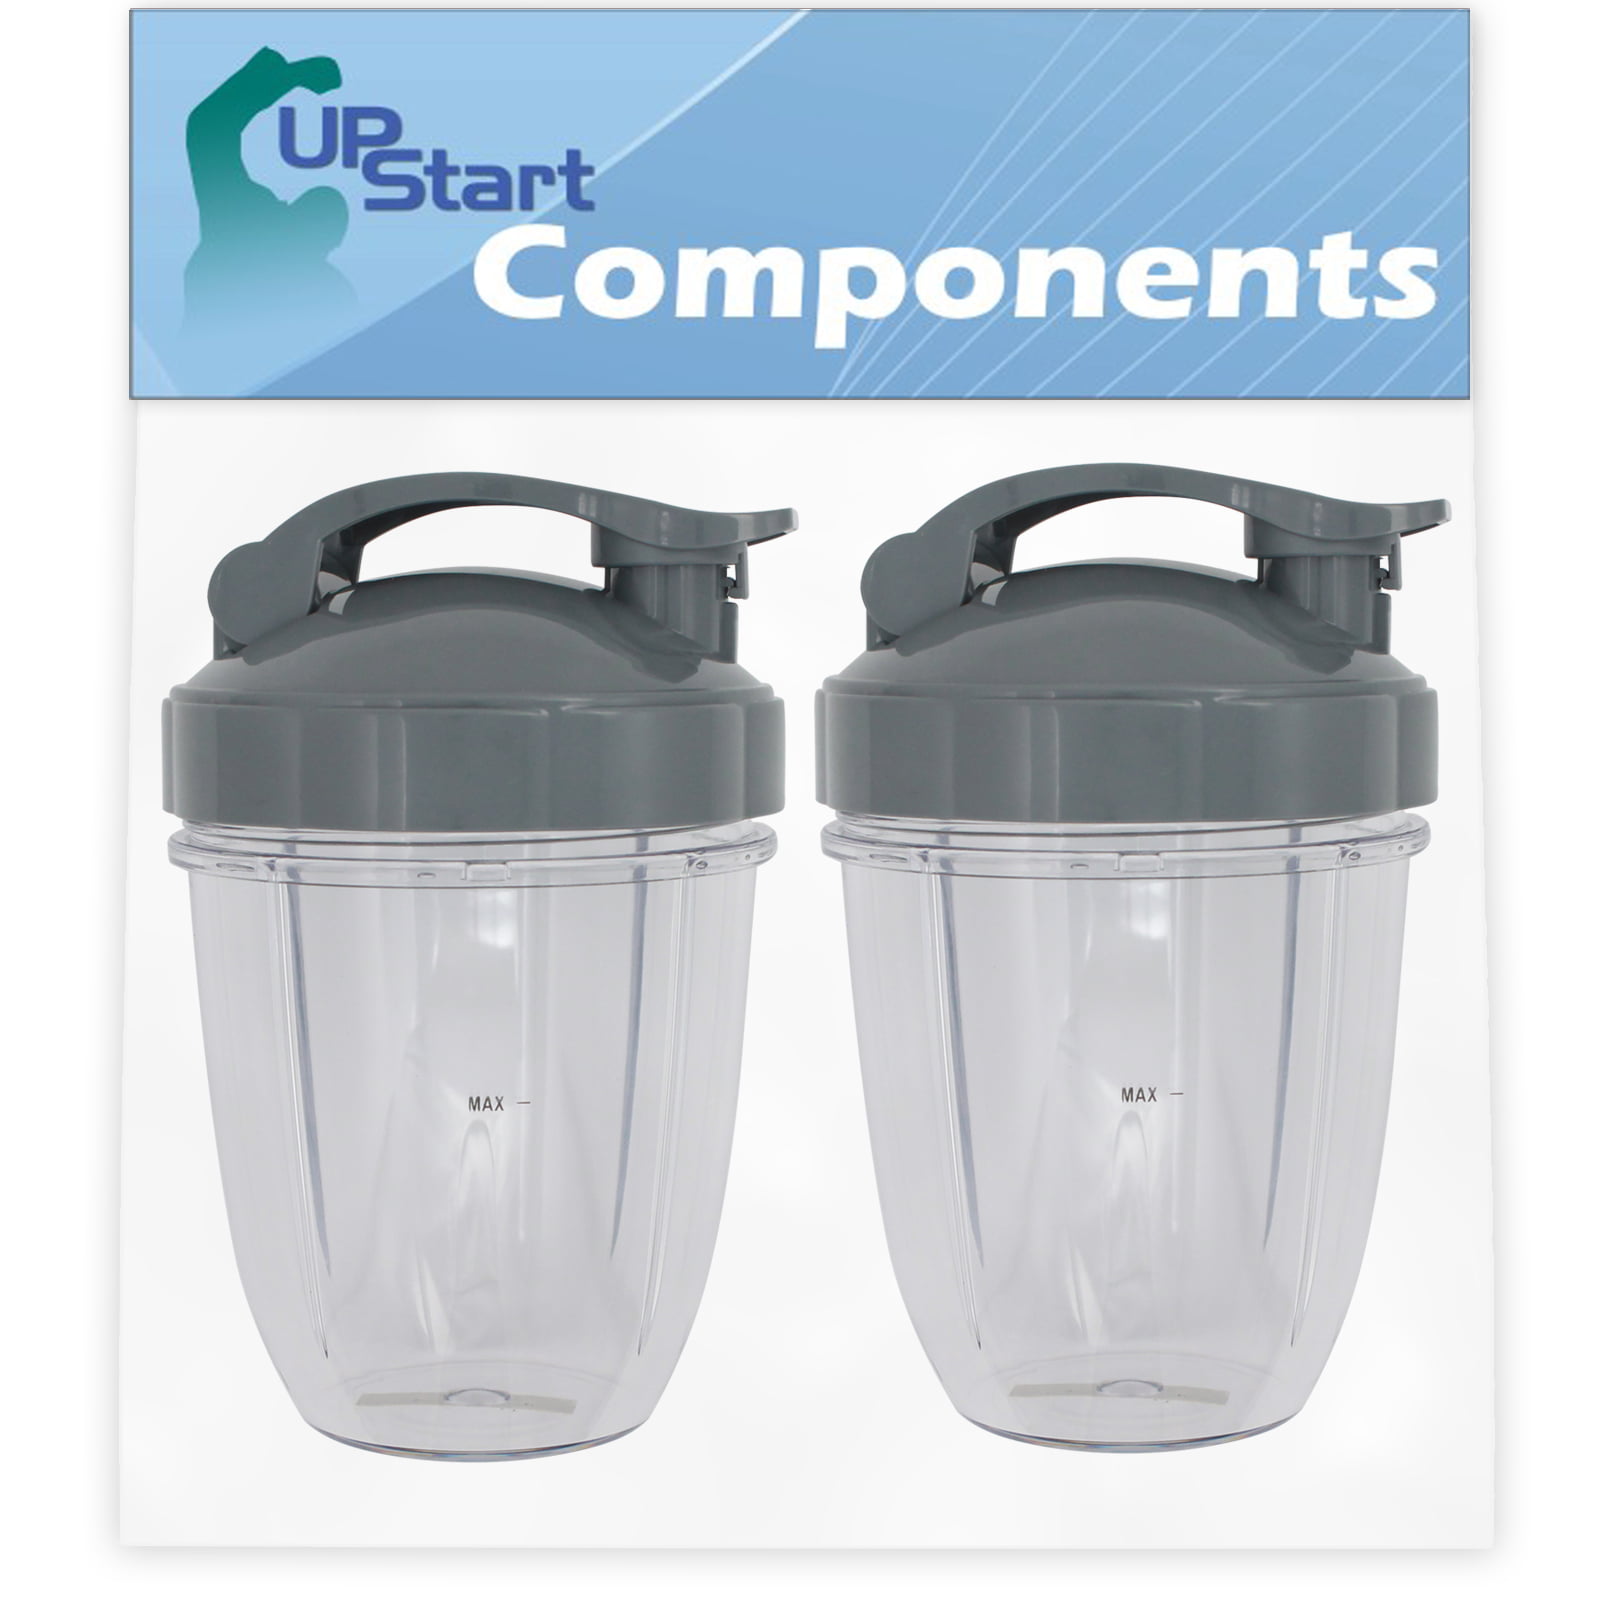 2 Pack Upstart Components Replacement NutriBullet Stay Fresh Resealable Cup Lids for NutriBullet 900W Blender Cups 